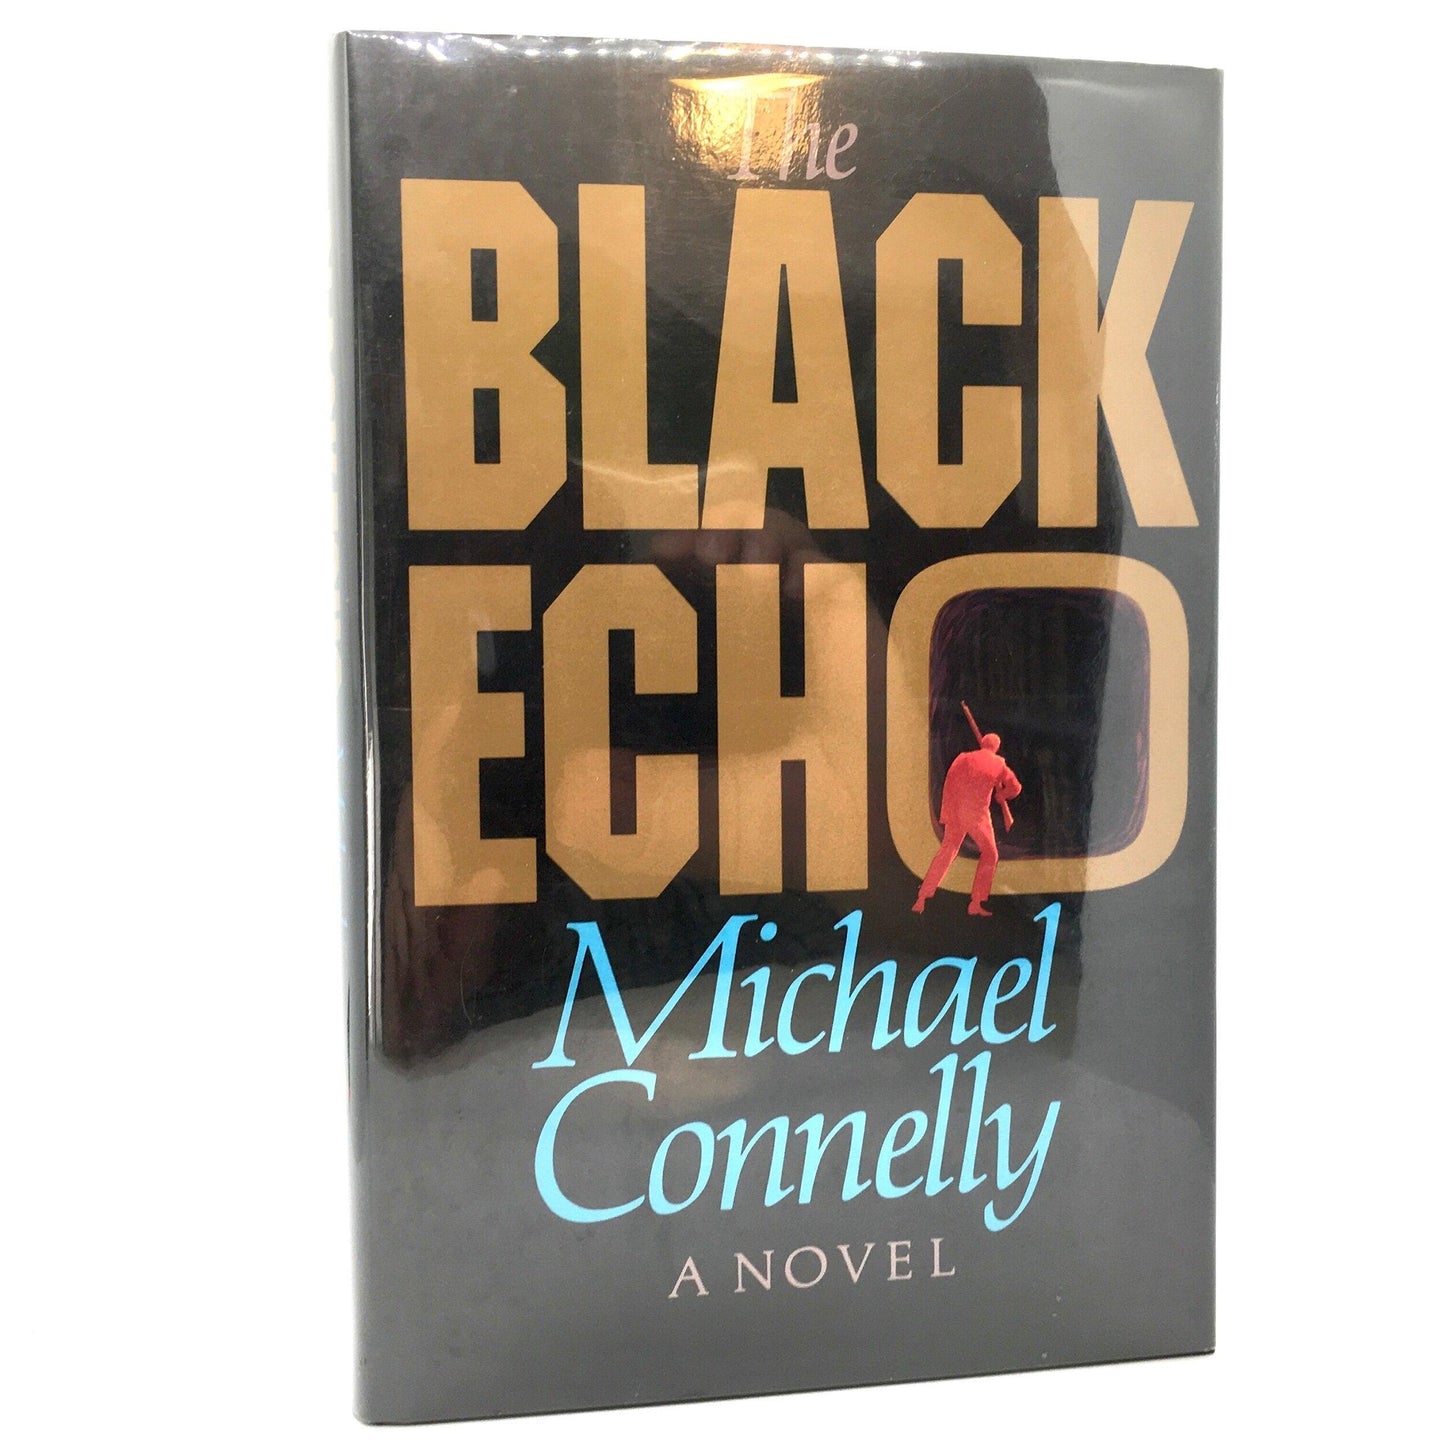 CONNELLY, Michael “Black Echo” [Little, Brown & Co, 1992] 1st Edition (Signed) - Buzz Bookstore